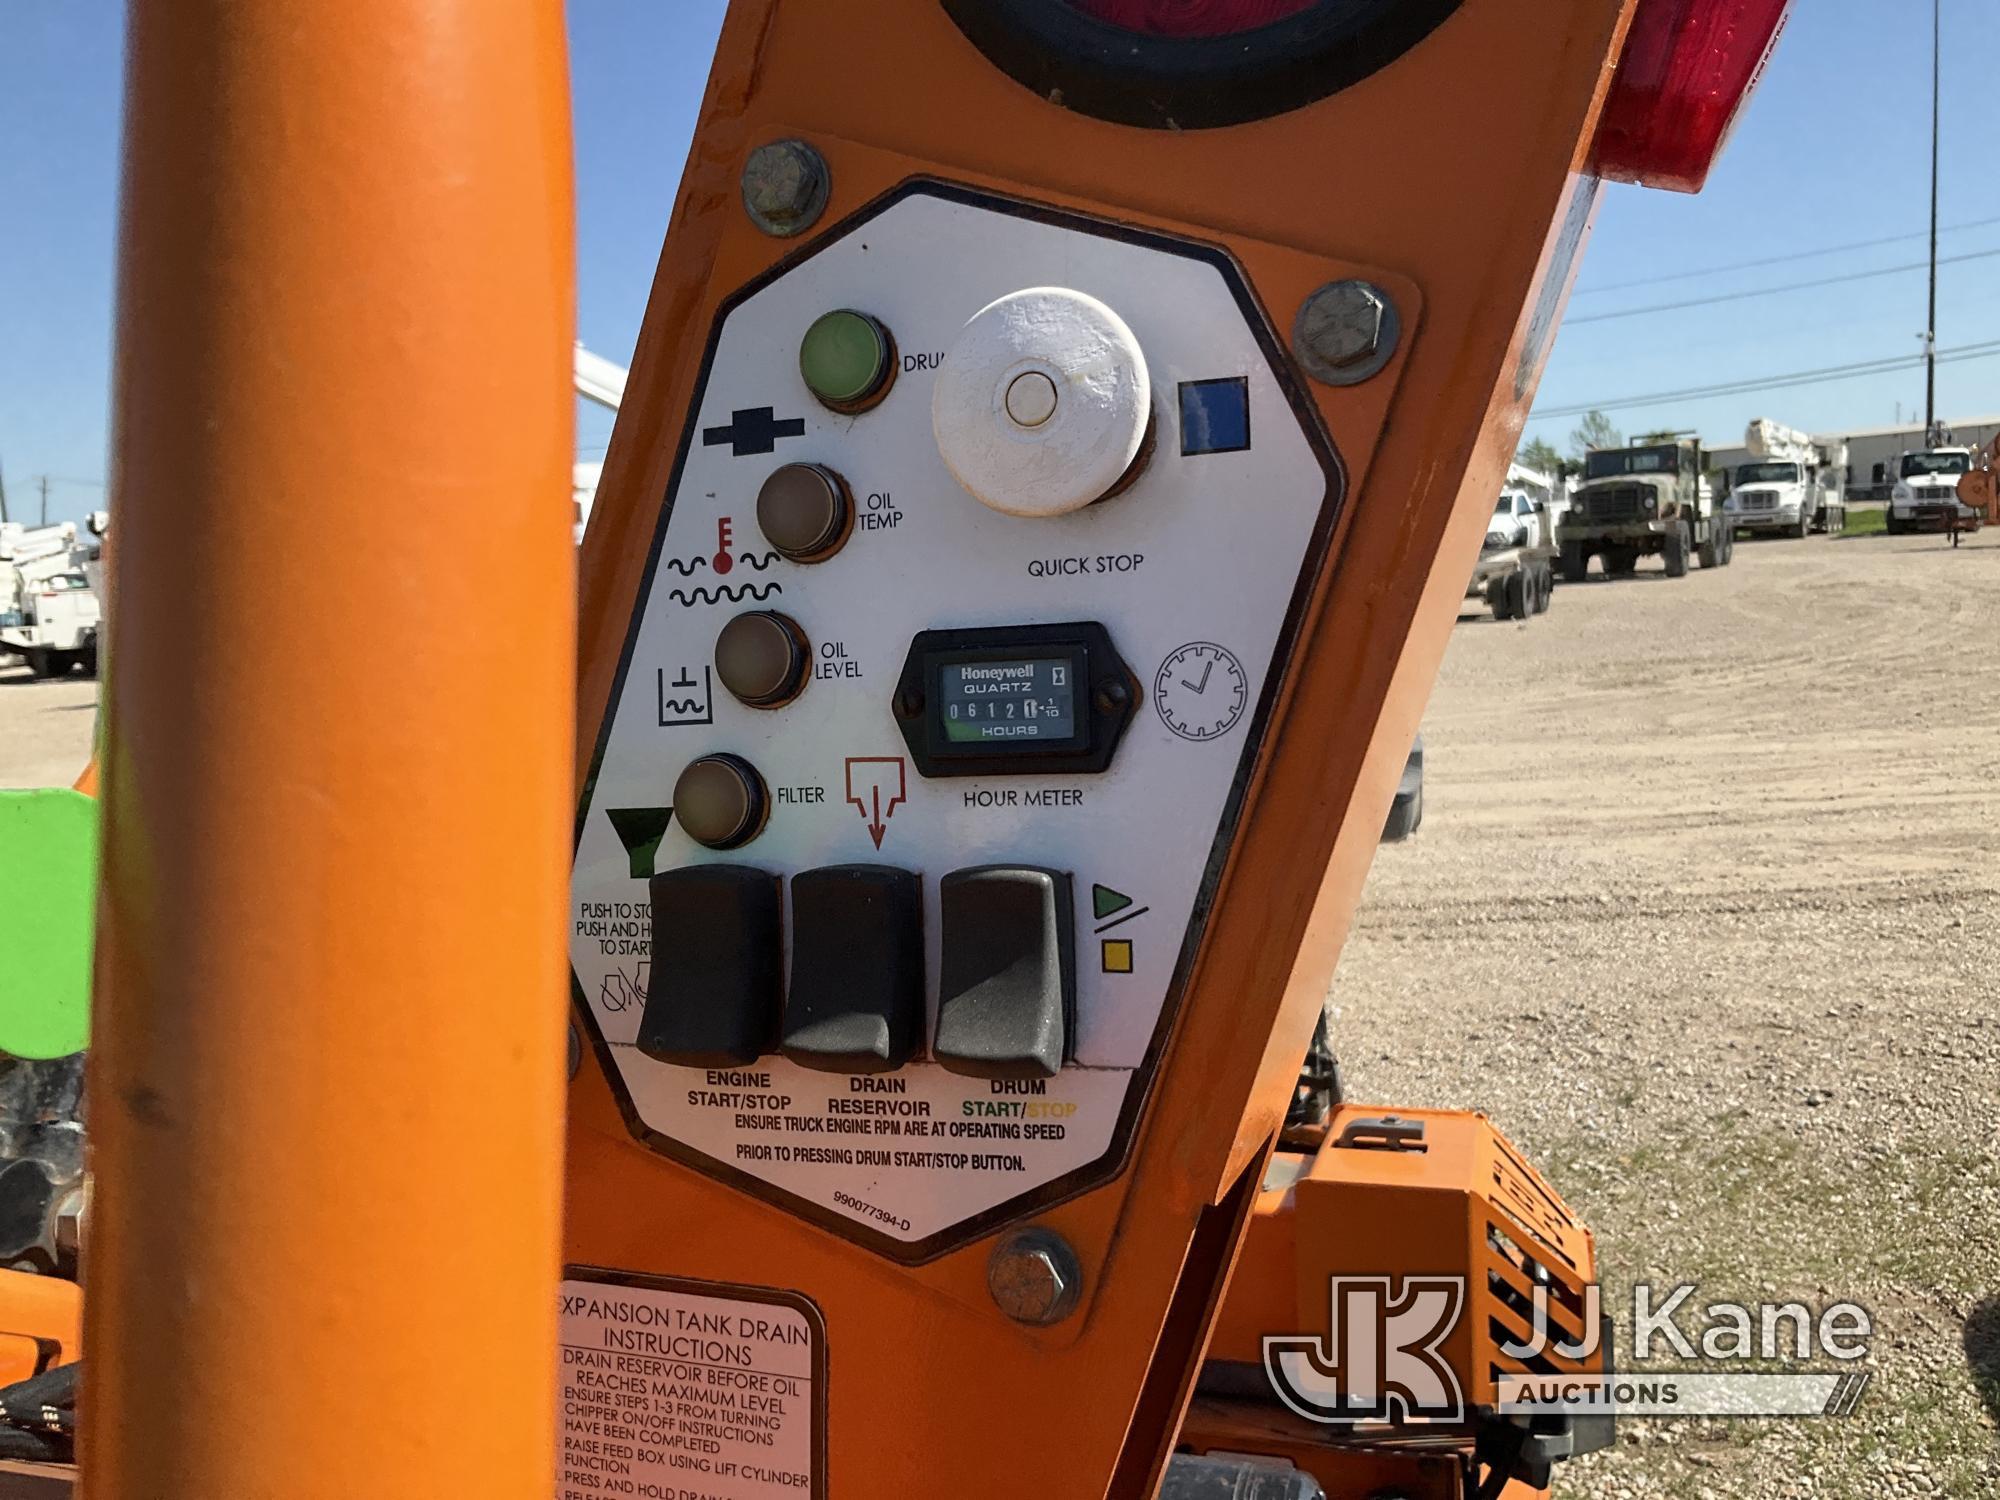 (Waxahachie, TX) 2016 Altec DRM12HE Chipper (12in Drum) Fair) (Seller States: Chipper has low blower